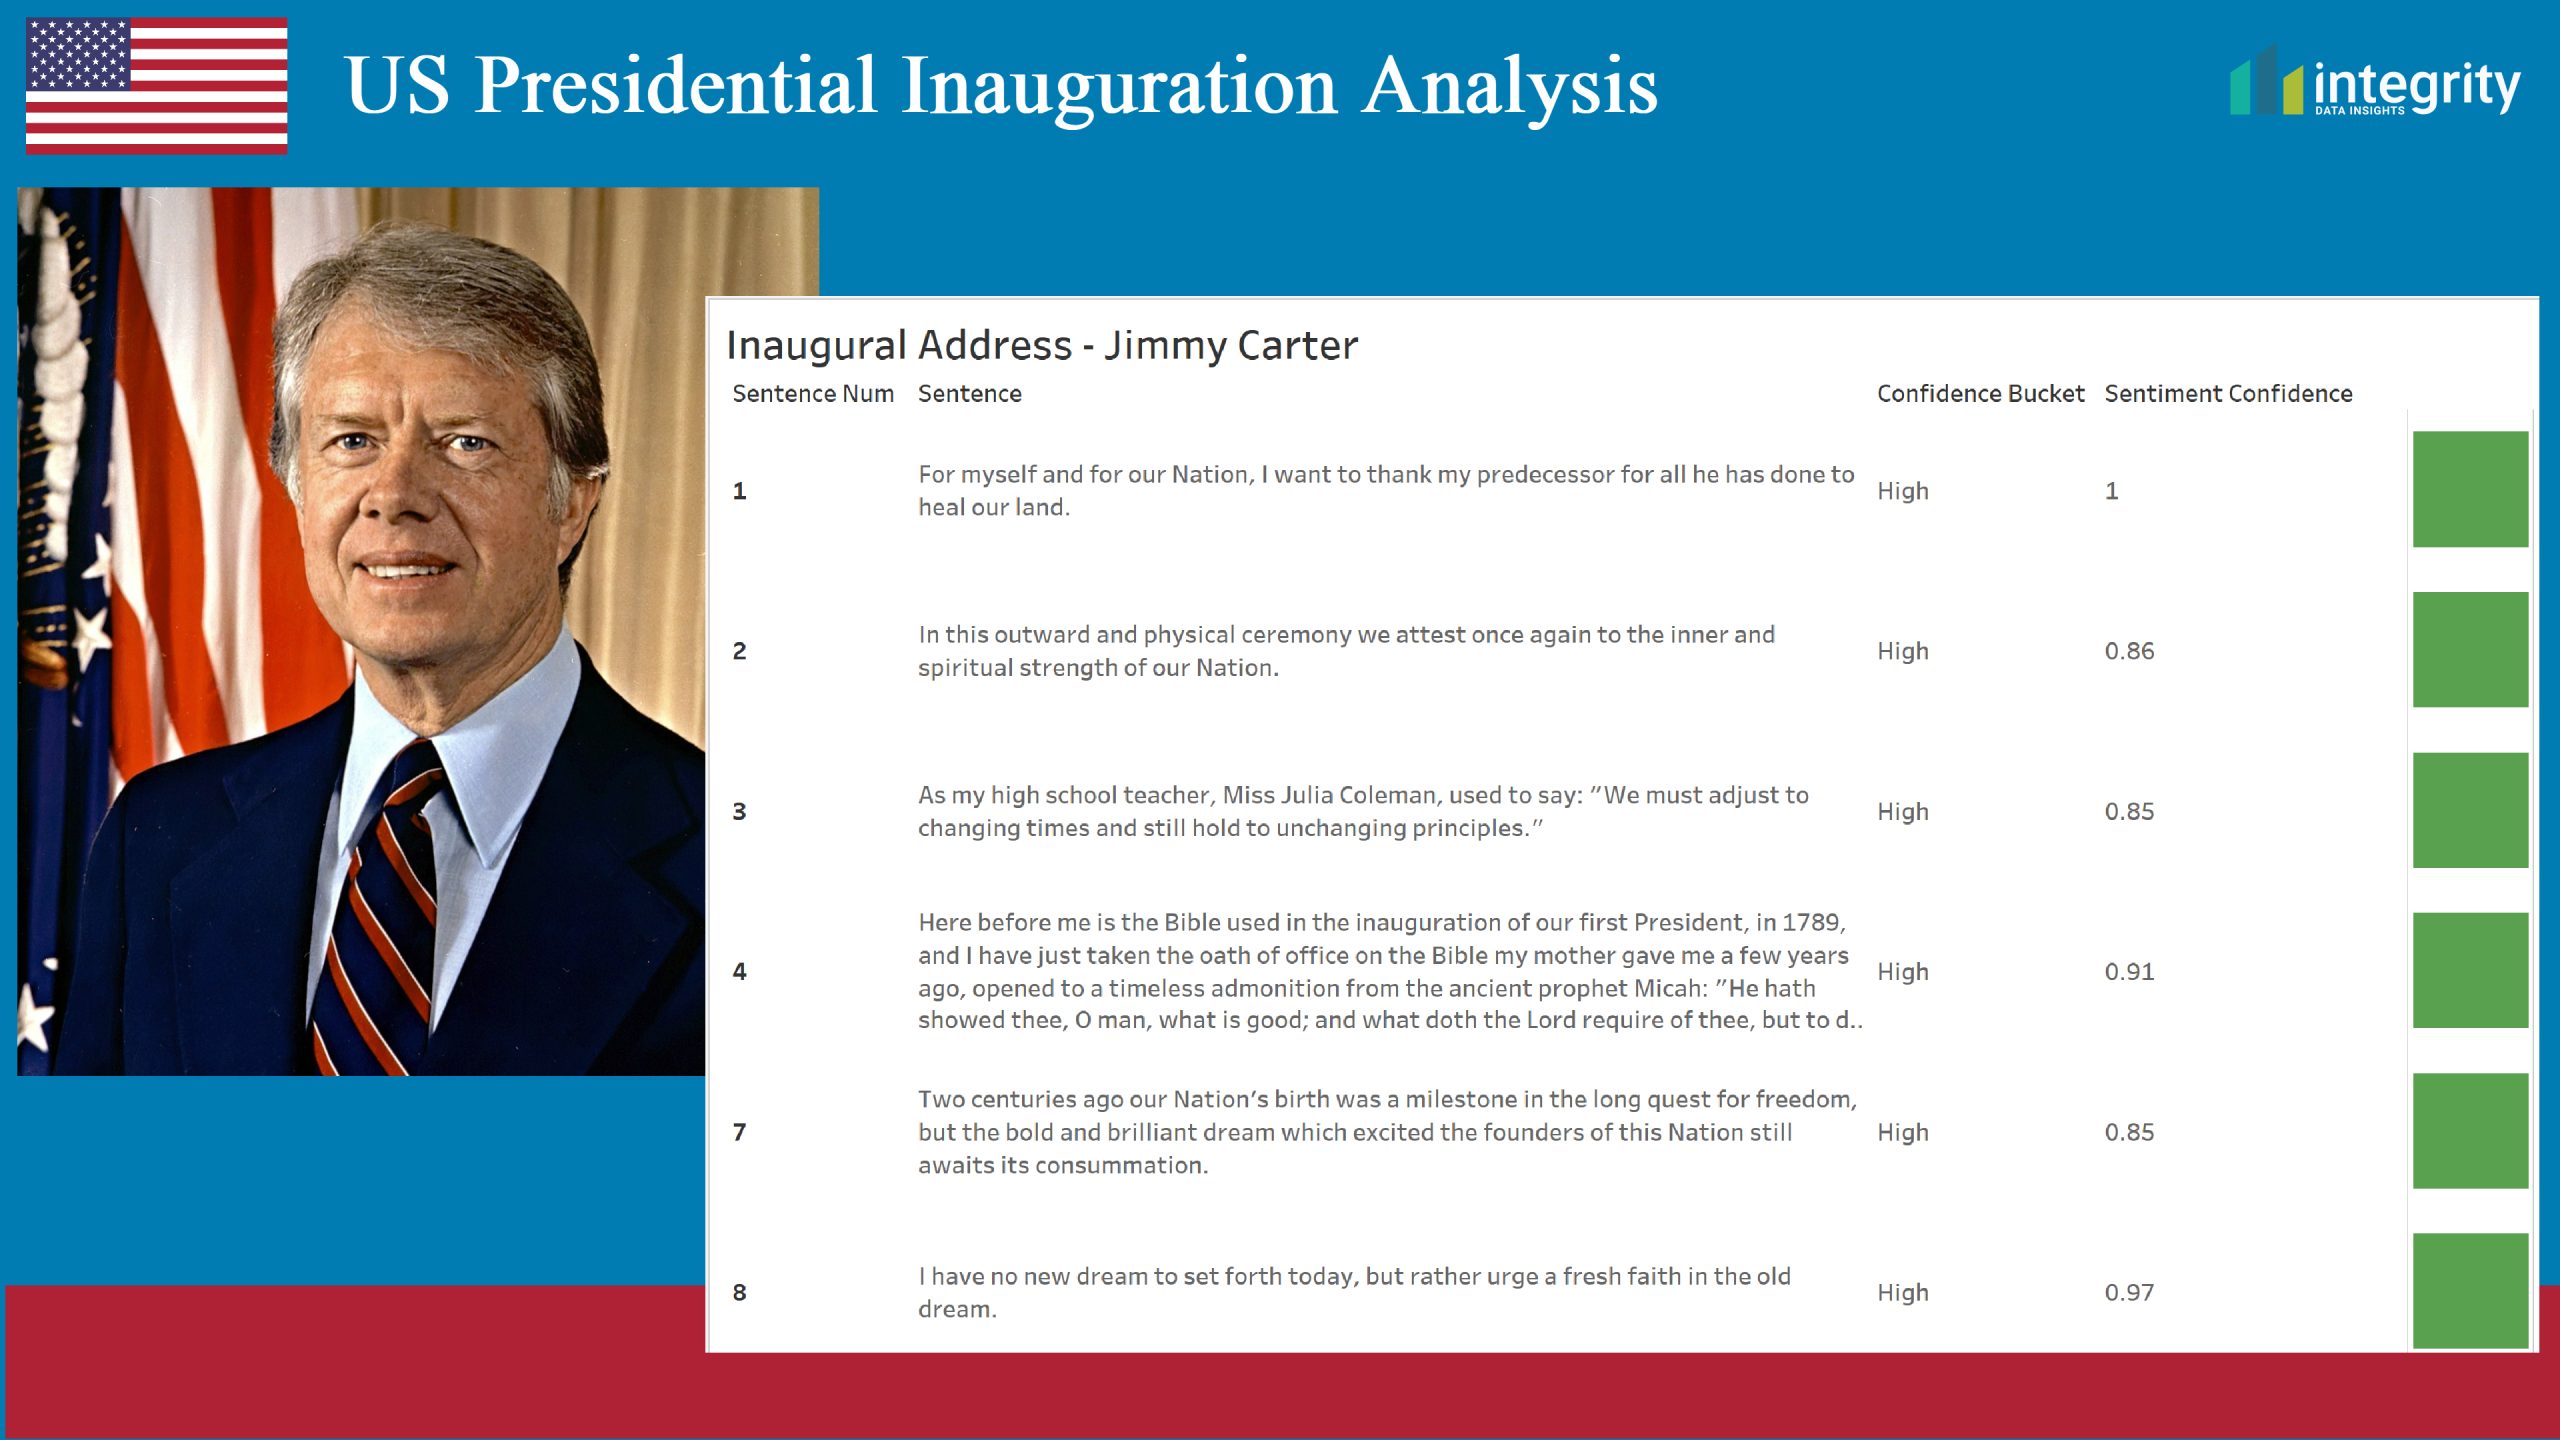 Positive remarks given by Jimmy Carter at his inaugural address